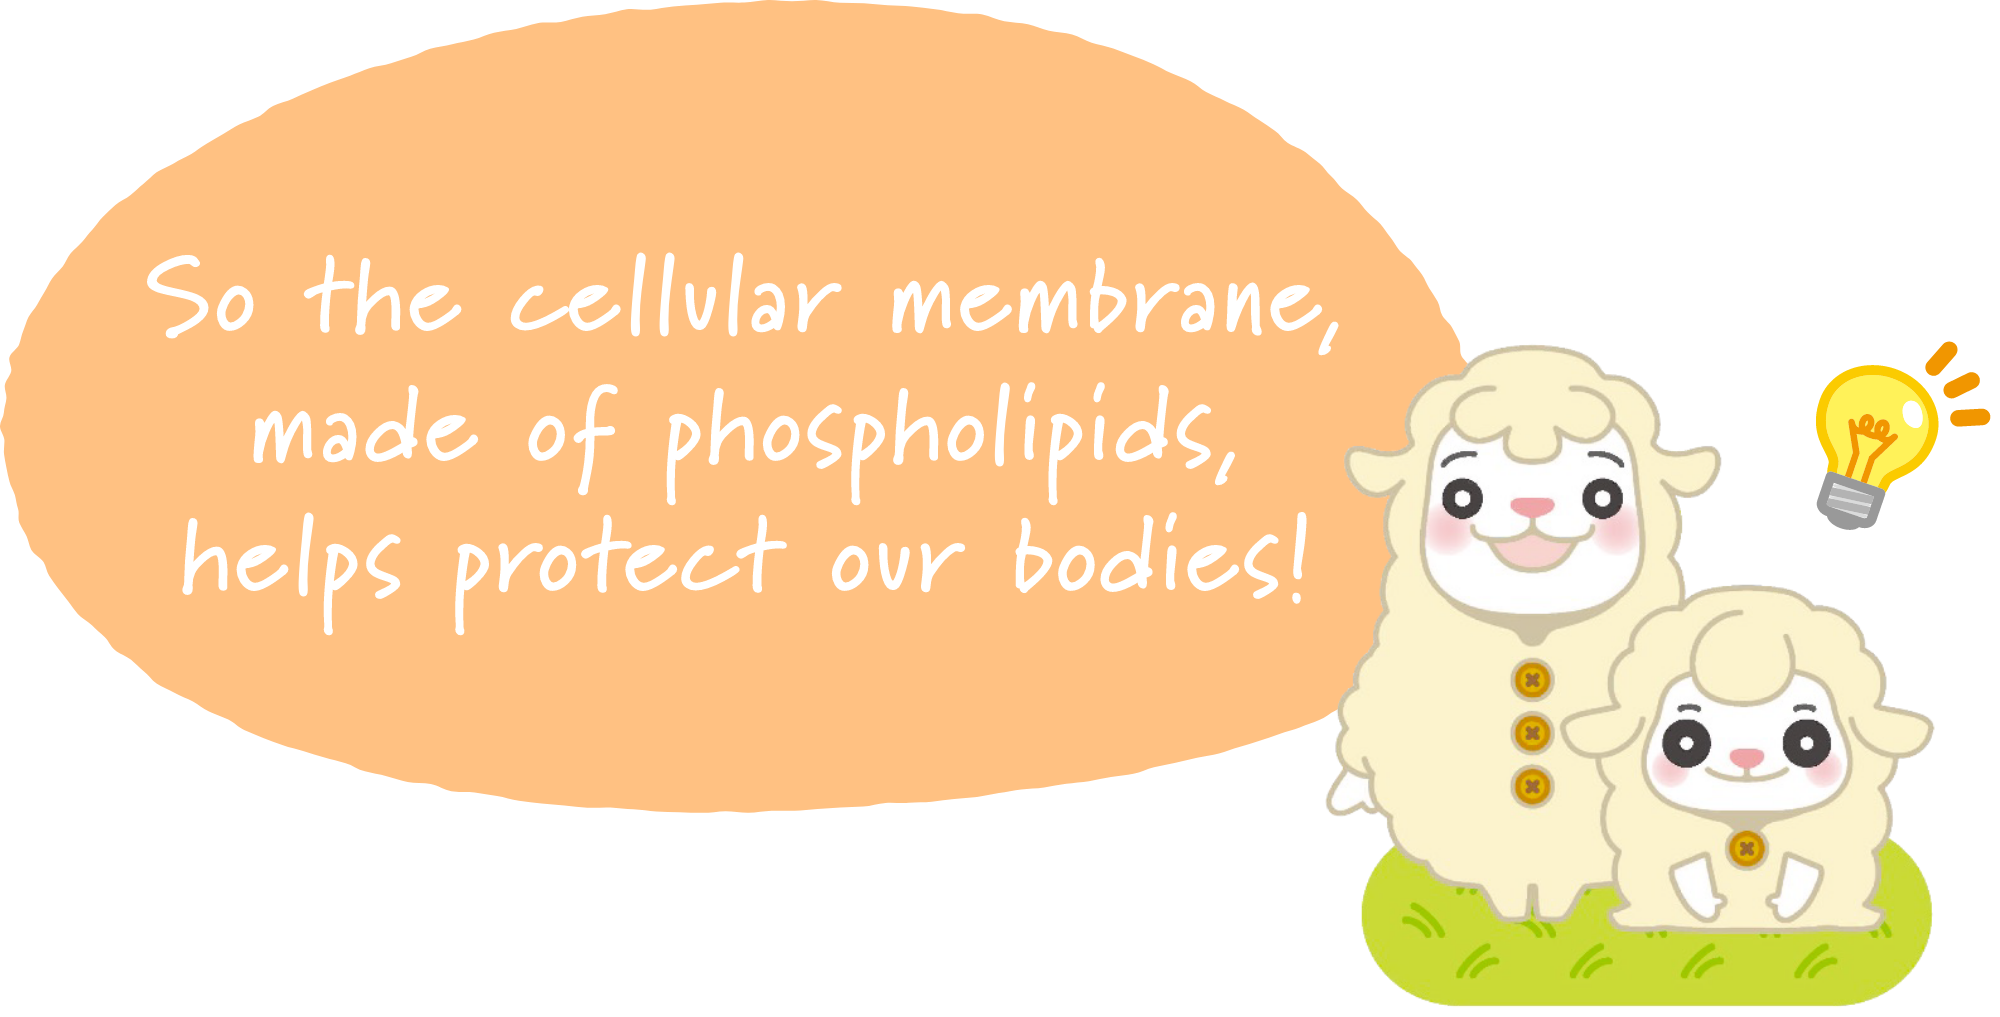 So the cellular membrane, made of phospholipids, helps protect our bodies!